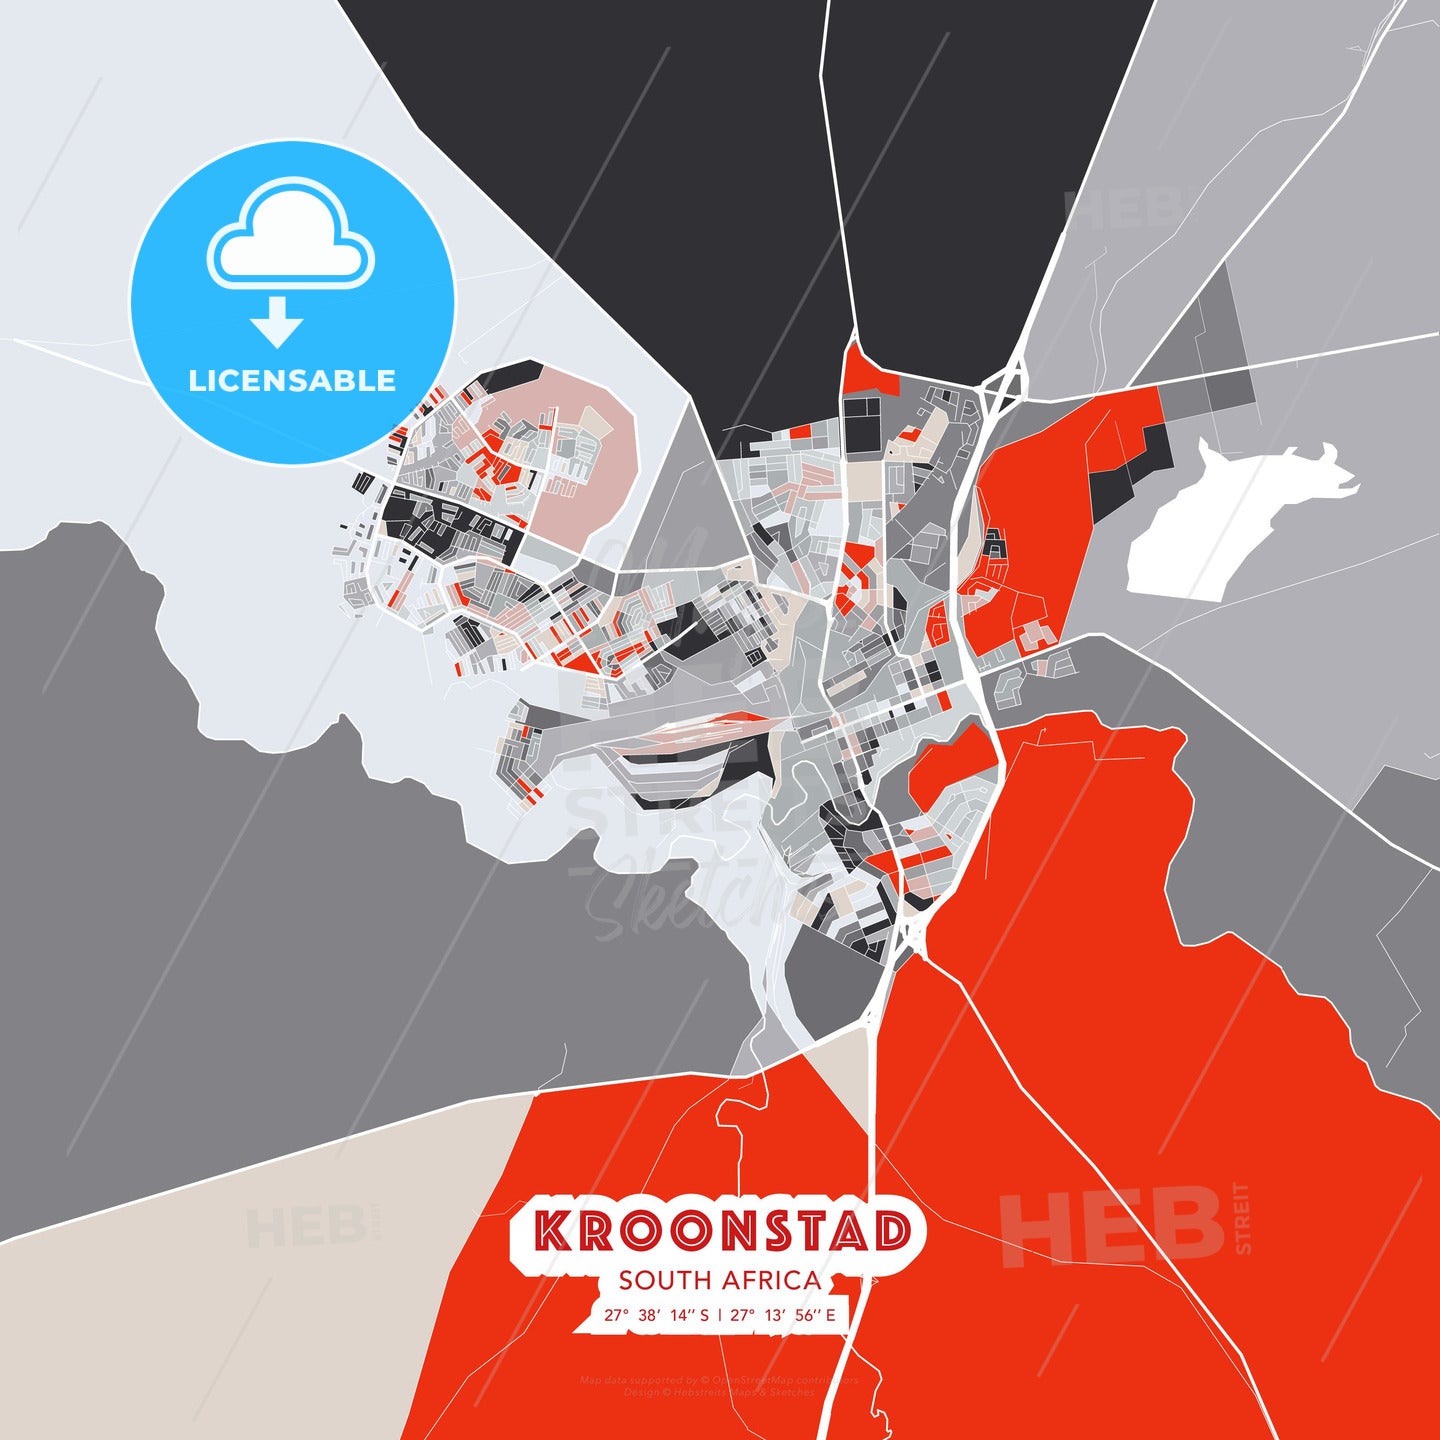 Kroonstad, South Africa, modern map - HEBSTREITS Sketches